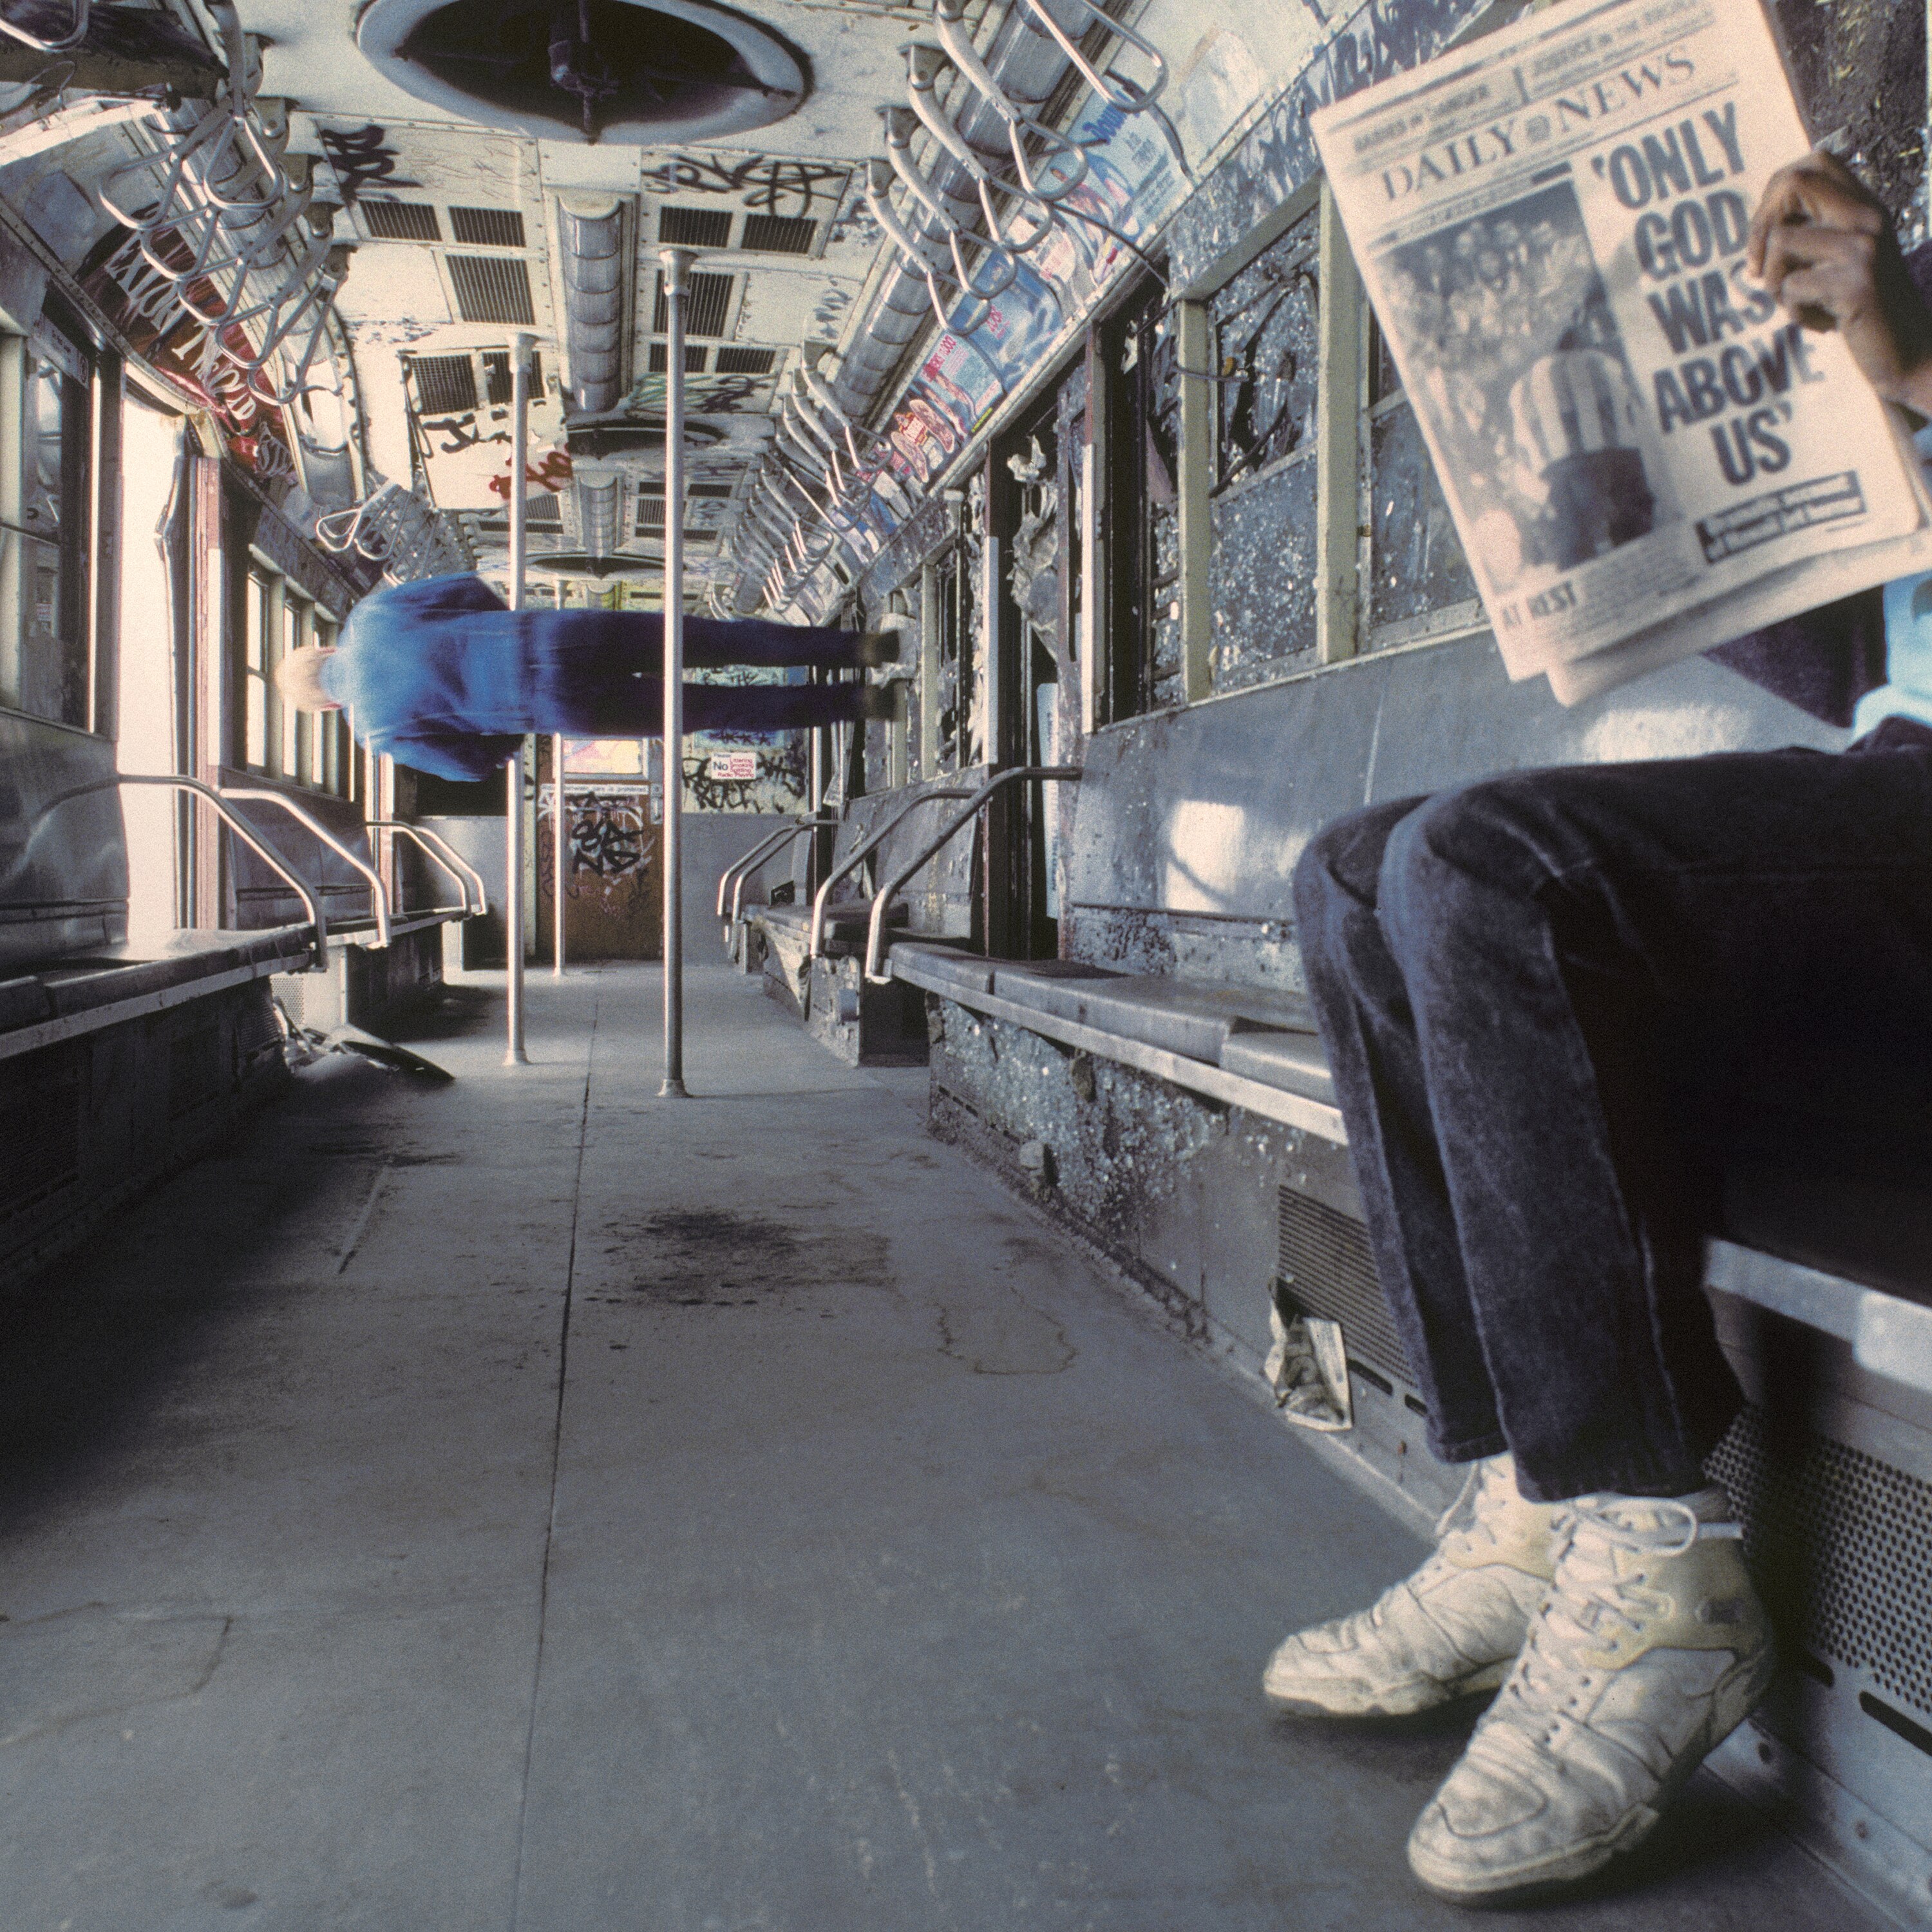 Photo of defunct new york subway cart with man floating sideways and man reading Daily News paper with ONLY GOD WAS ABOVE US